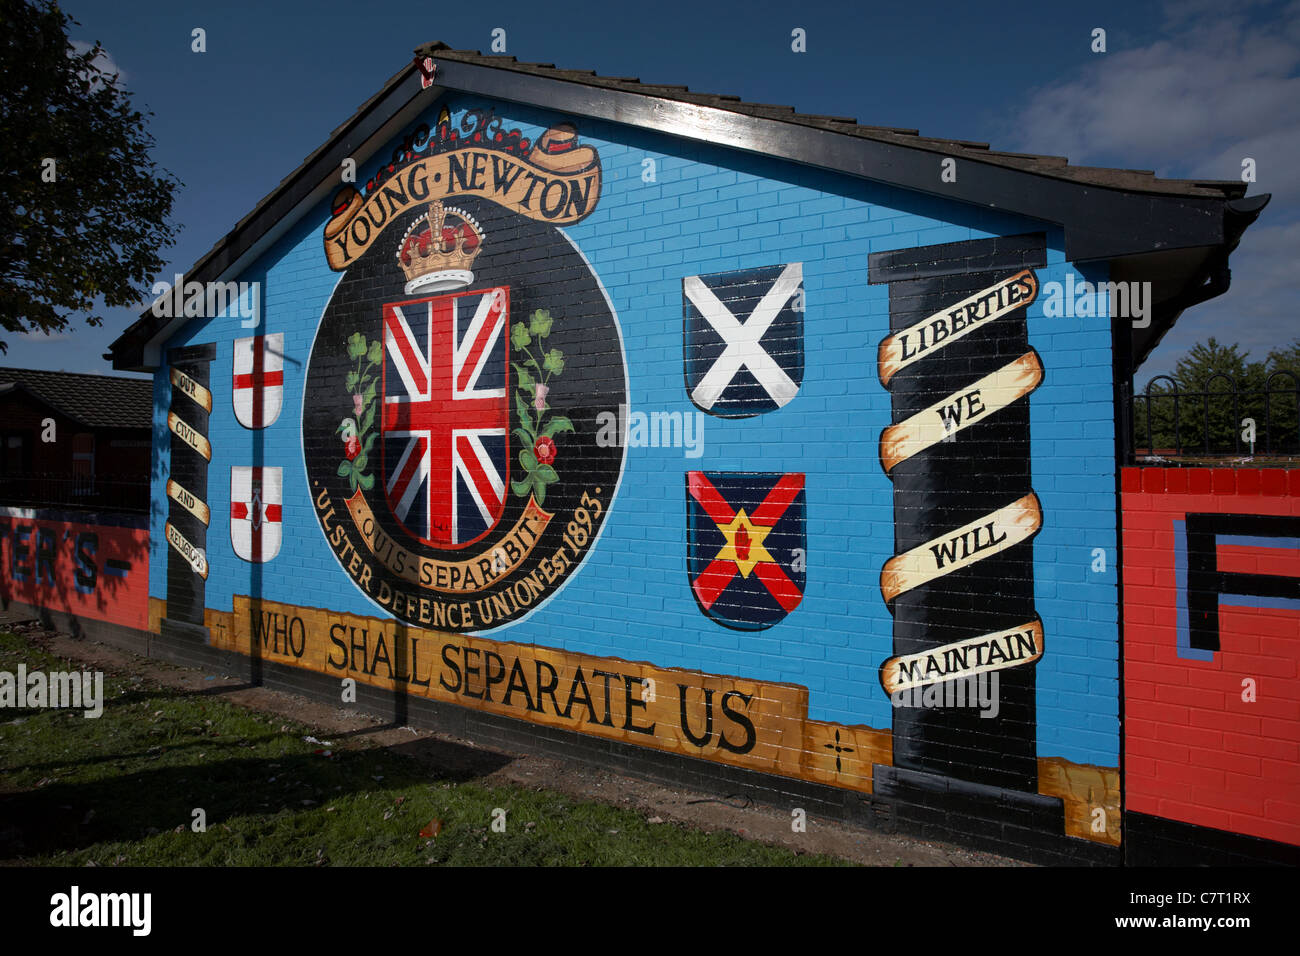 Loyalist terrorist wall mural depicting the young newton ulster defence union, newtownards road, Belfast, Northern Ireland, UK. Stock Photo